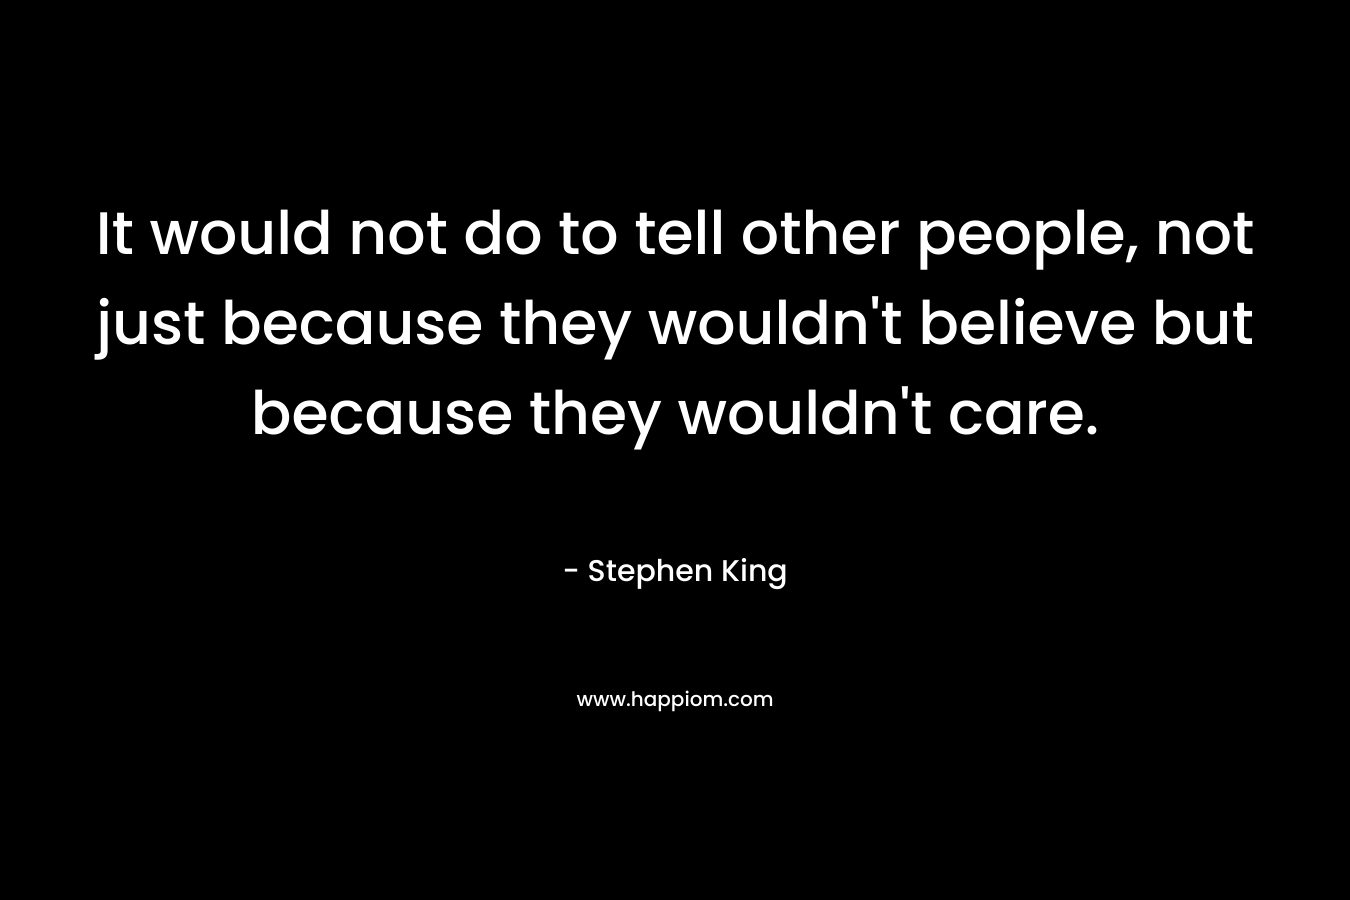 It would not do to tell other people, not just because they wouldn't believe but because they wouldn't care.